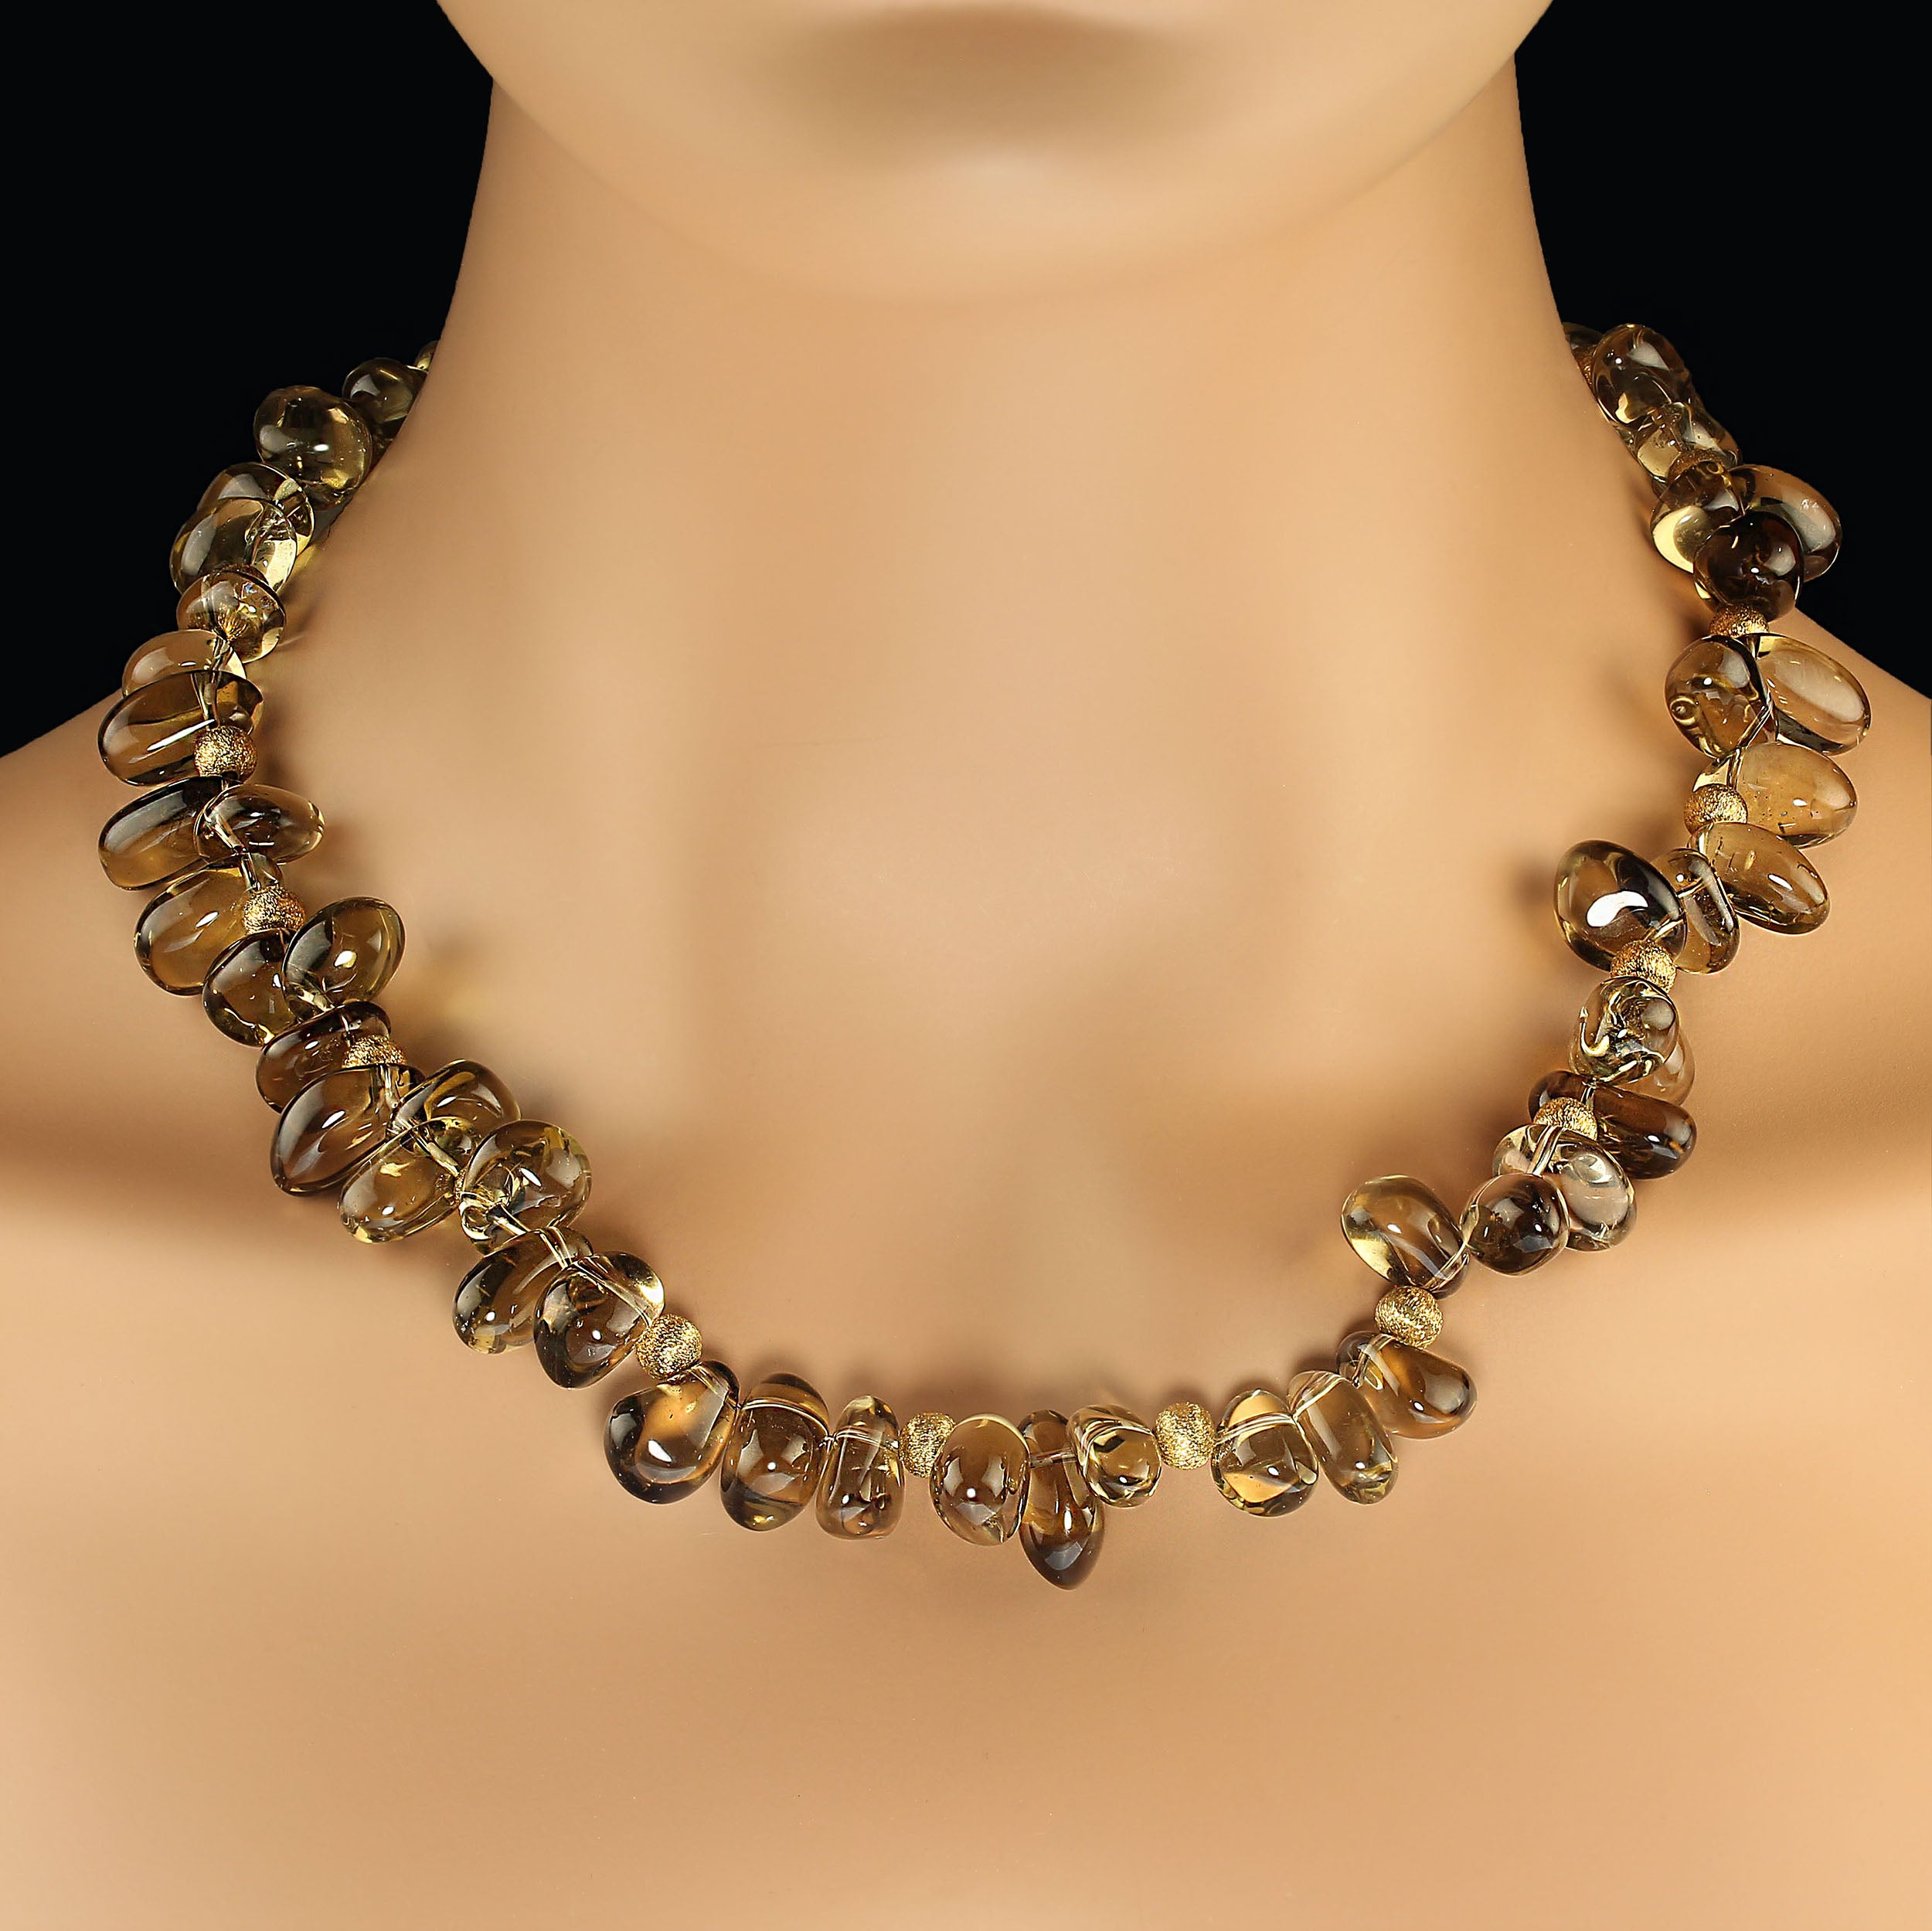 Absolutely beautiful necklace of smooth, transparent nuggets of smoky quartz with frosted goldy accents. This incredible necklace is such a pleasure to wear.  At 19 inches it is very versatile, and the color is perfect. MN2433